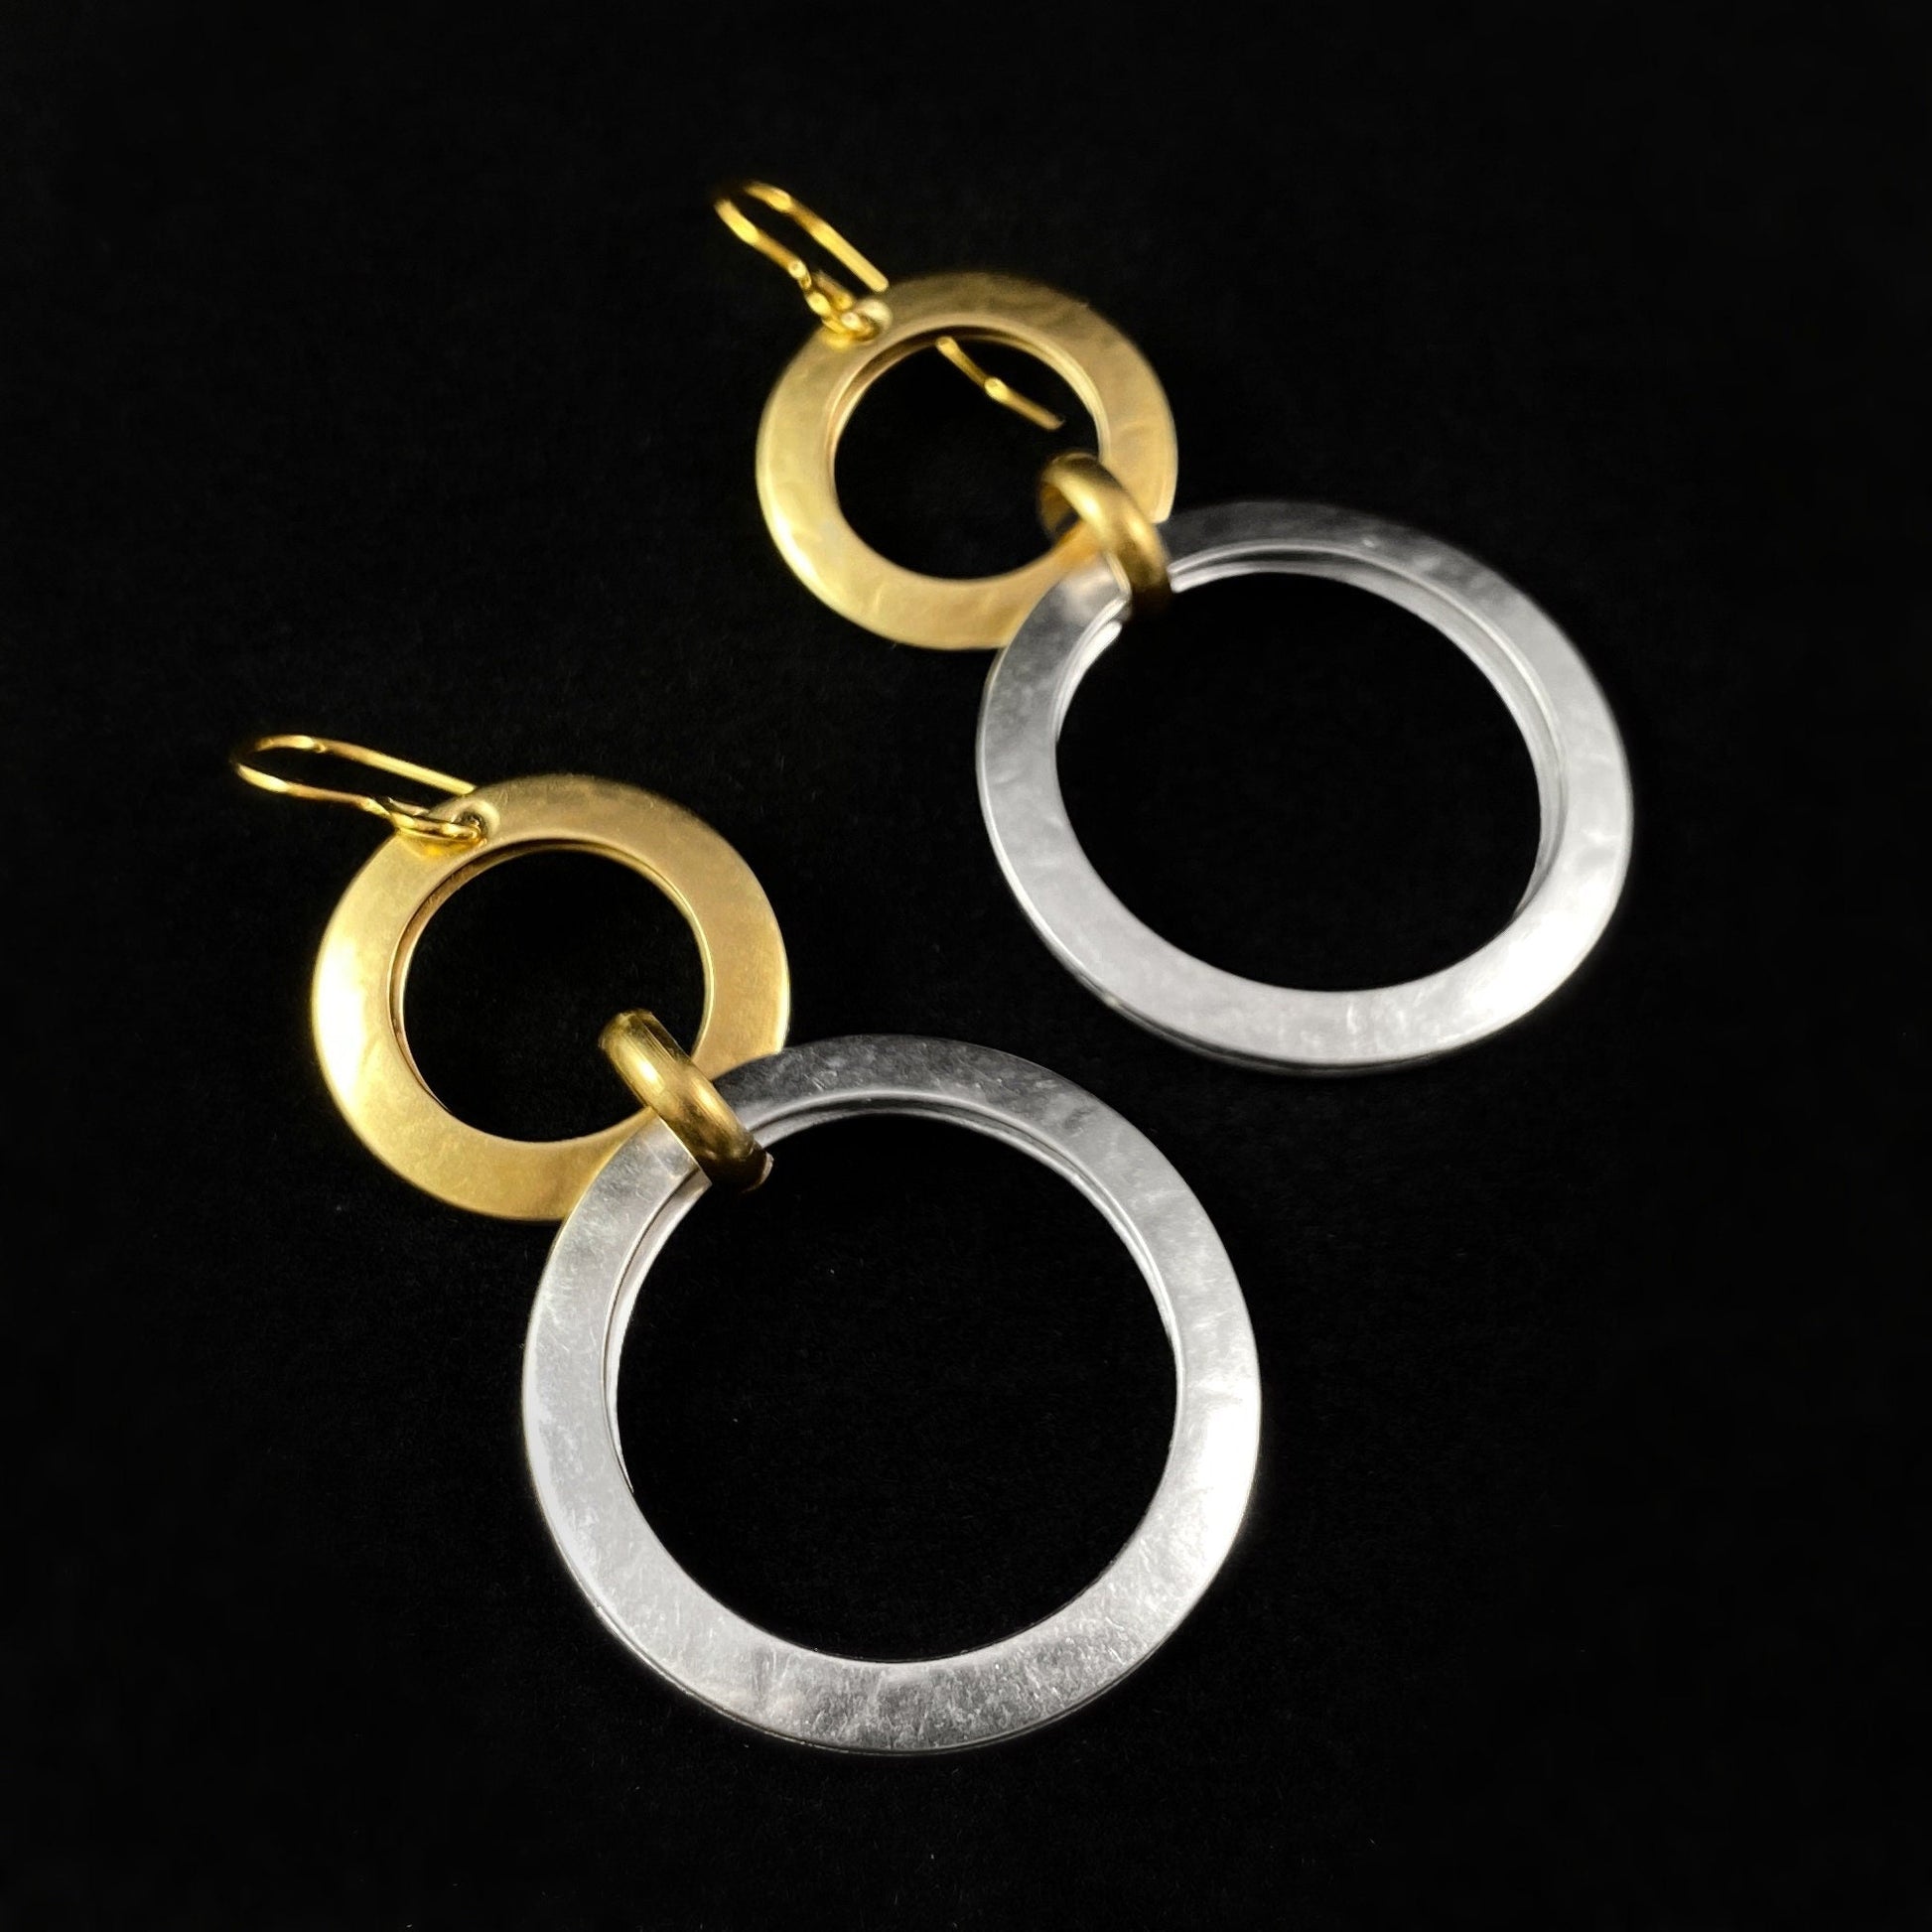 Handmade Gold and Silver Rings Dangle Earrings, Made in USA